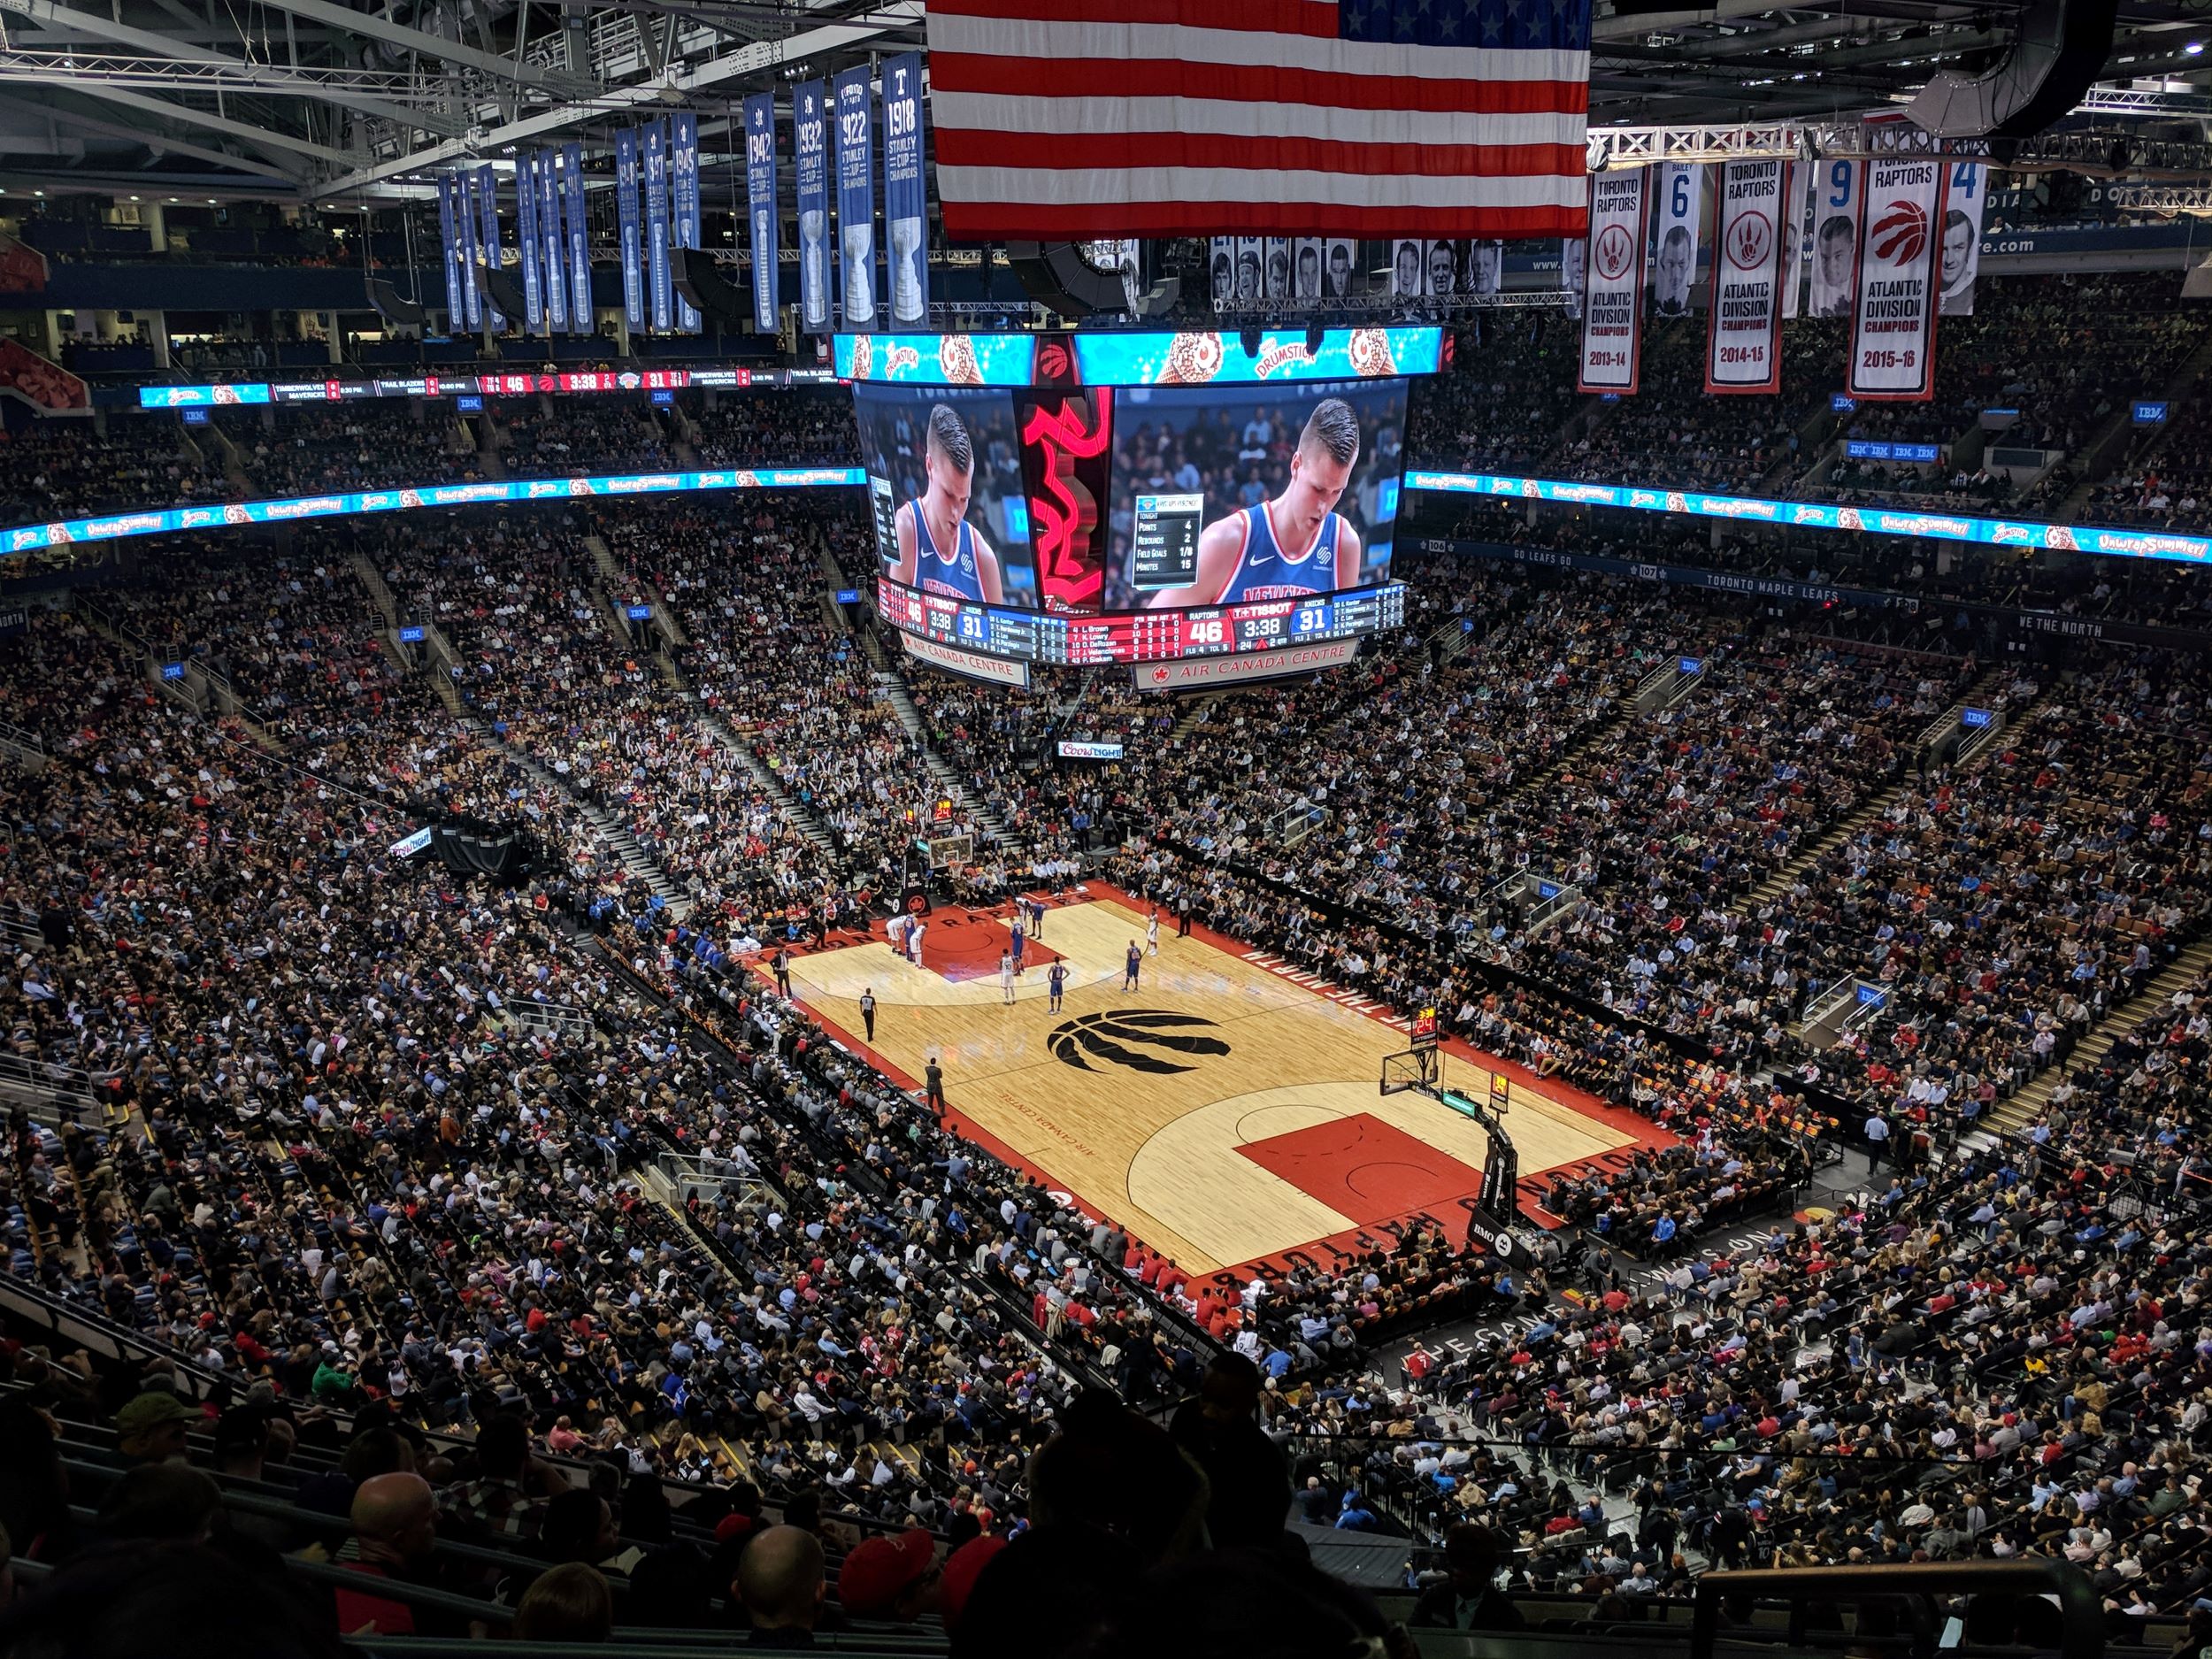 Photo of the court for an NBA game at Toronto Raptors home court, the ScotiaBank Arena.